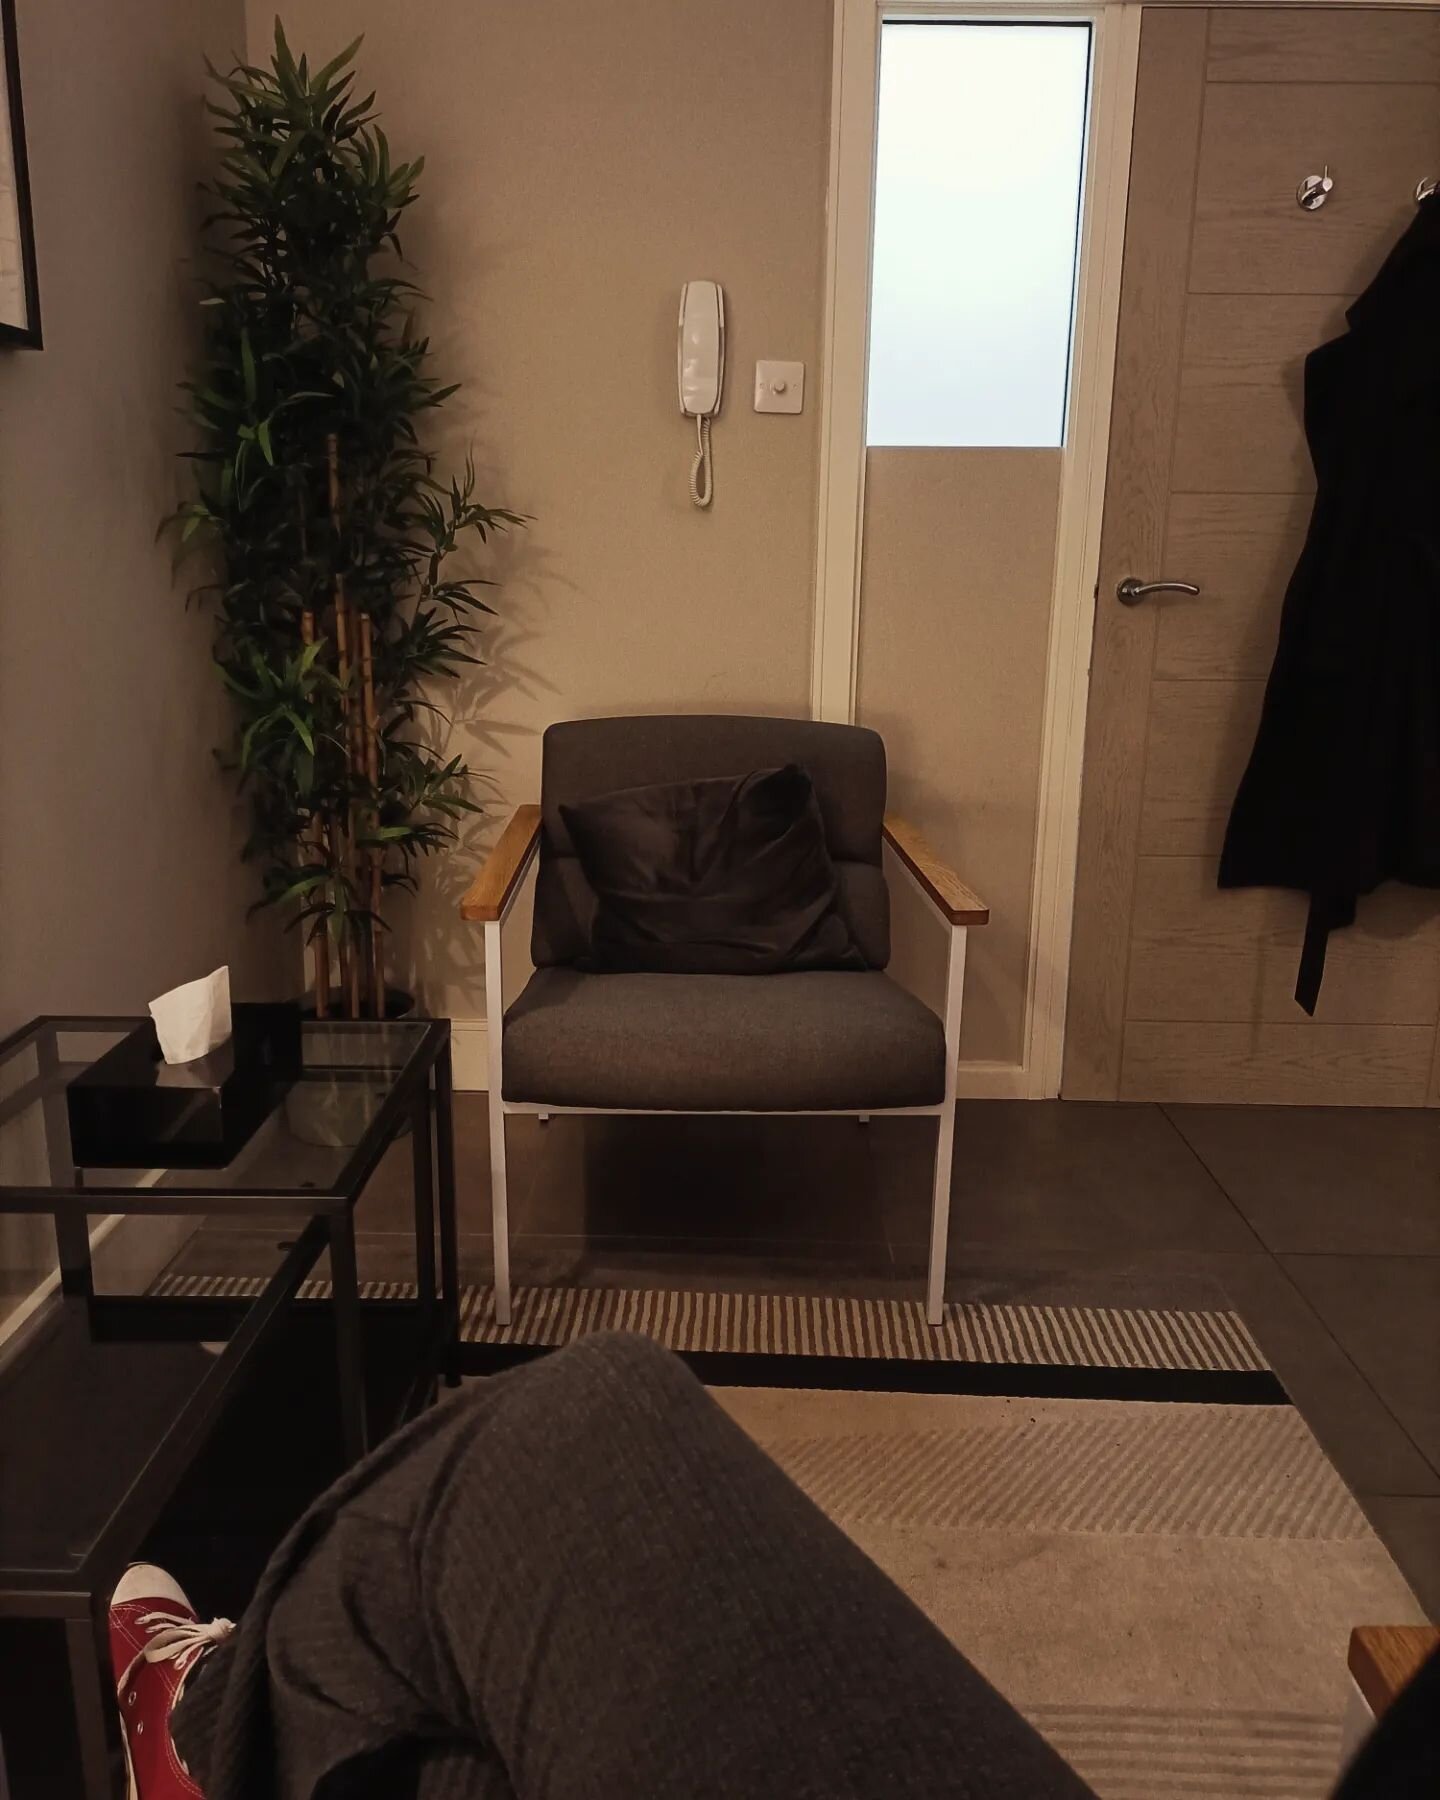 What I see and what you see (minus me!) 🛋️🌿

Here's the in person therapy room. It's pretty comfortable, relaxing, and super central, just a few steps from Surbiton station. There's a gender neutral toilet here. We have refreshing water, and a wait